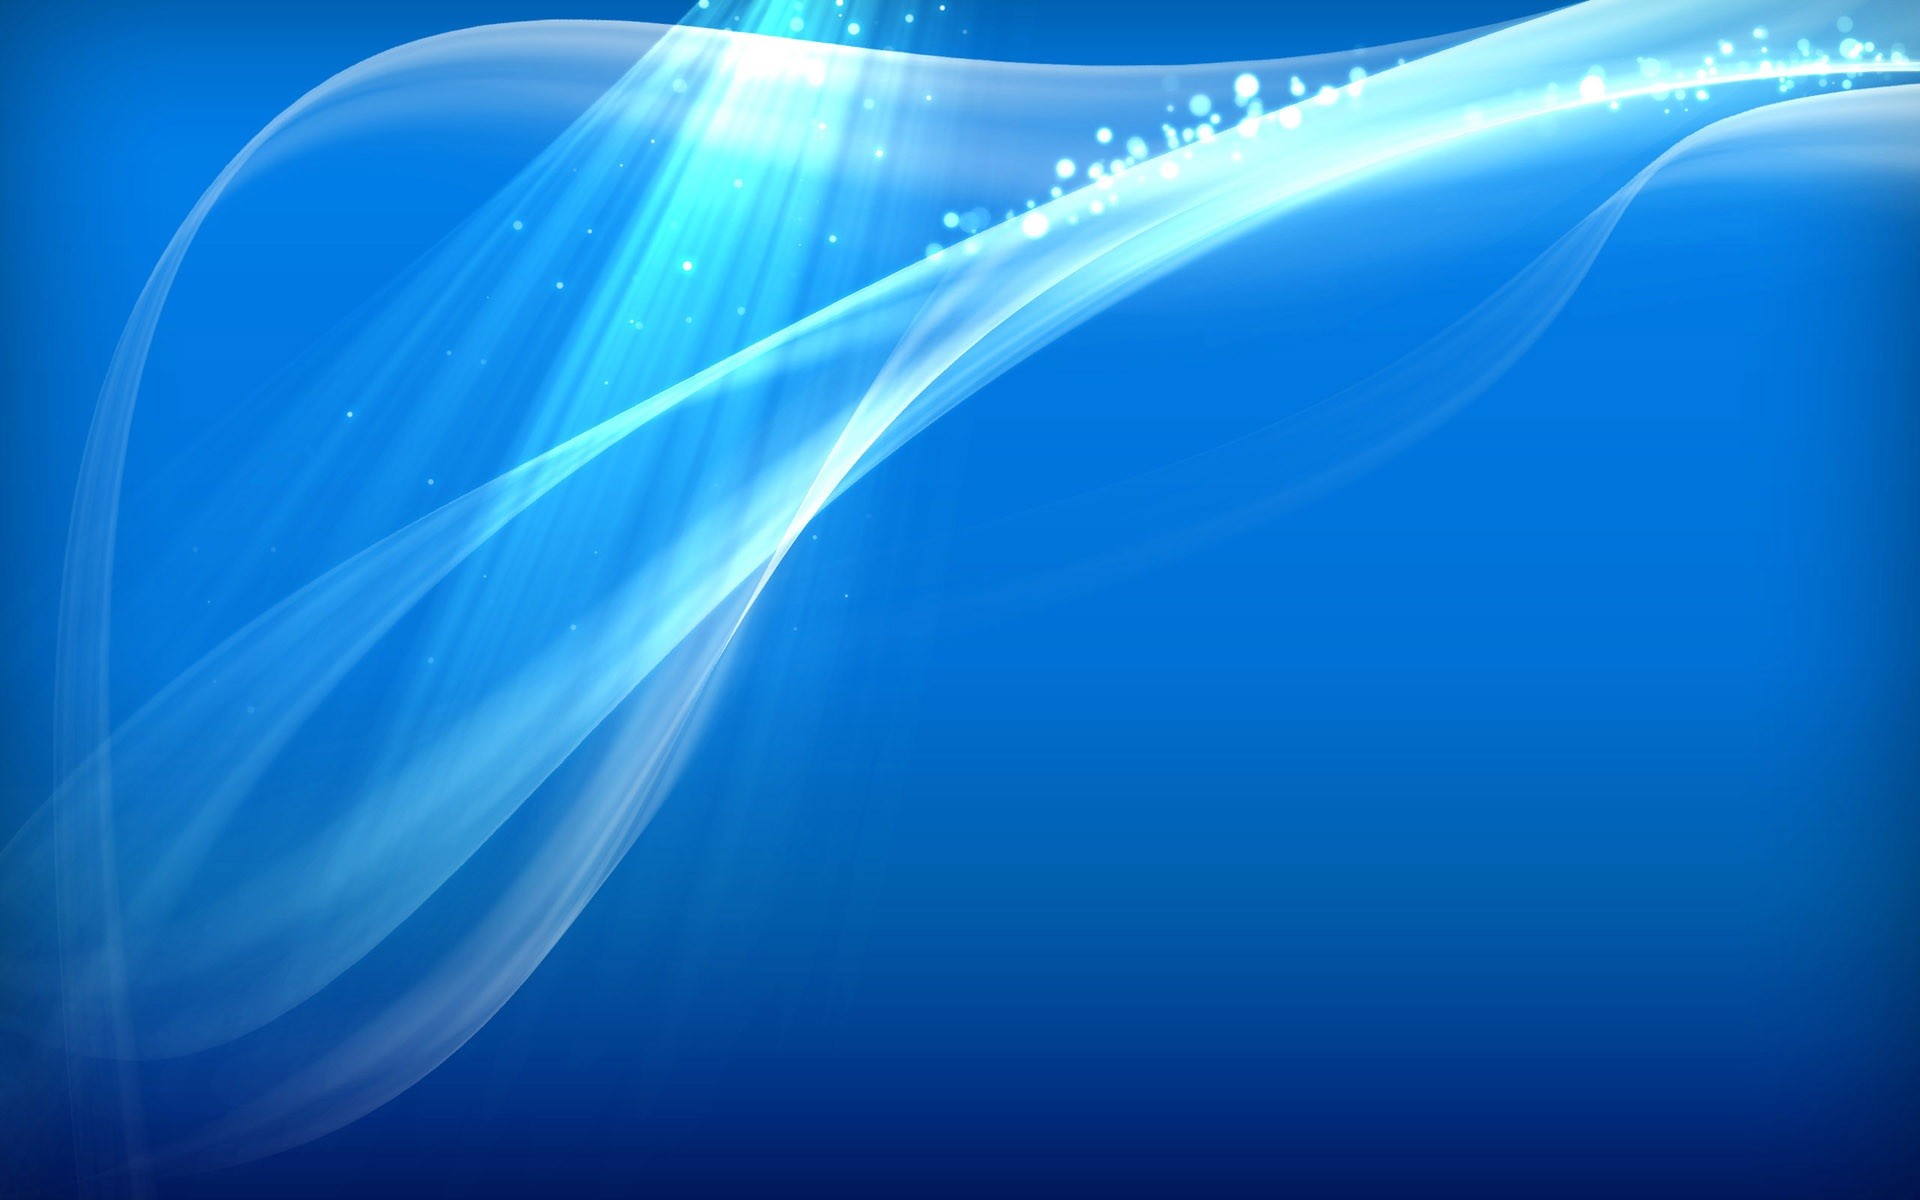 1920x1200 Eye Catching Blue Backgrounds beautiful art hd wallpapers water drop images  gif pictures awesome graphics on for desktop pc lapy fb timeline covers dp  pics.